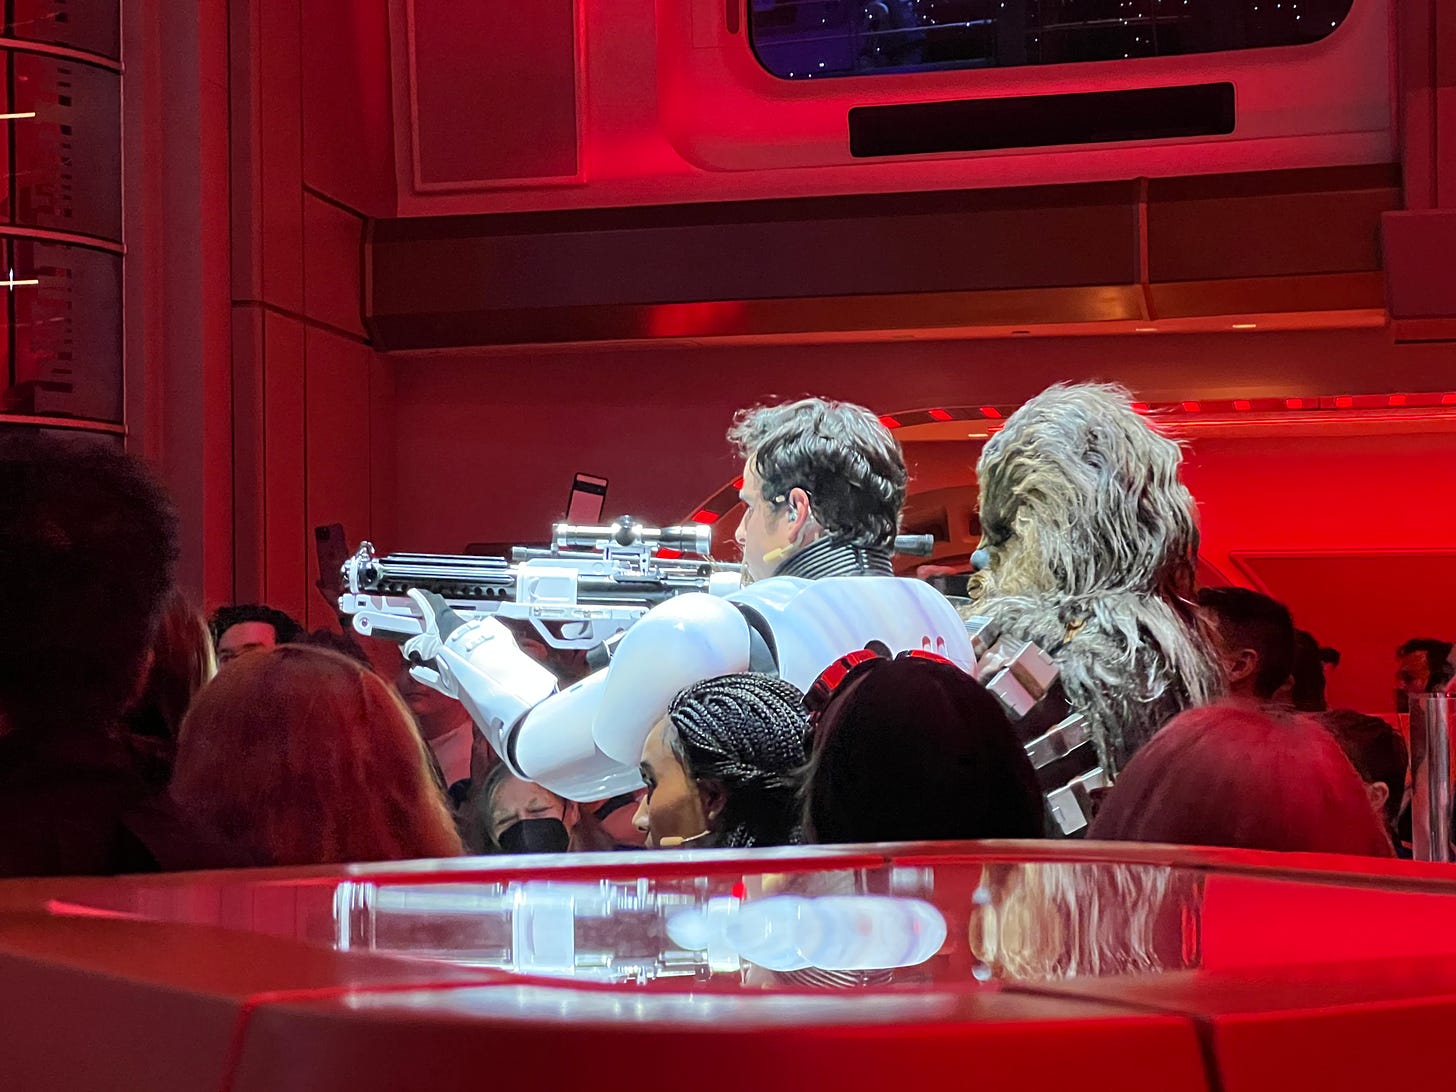 A stormtrooper with his helmet off toting a gun, next to Chewbacca